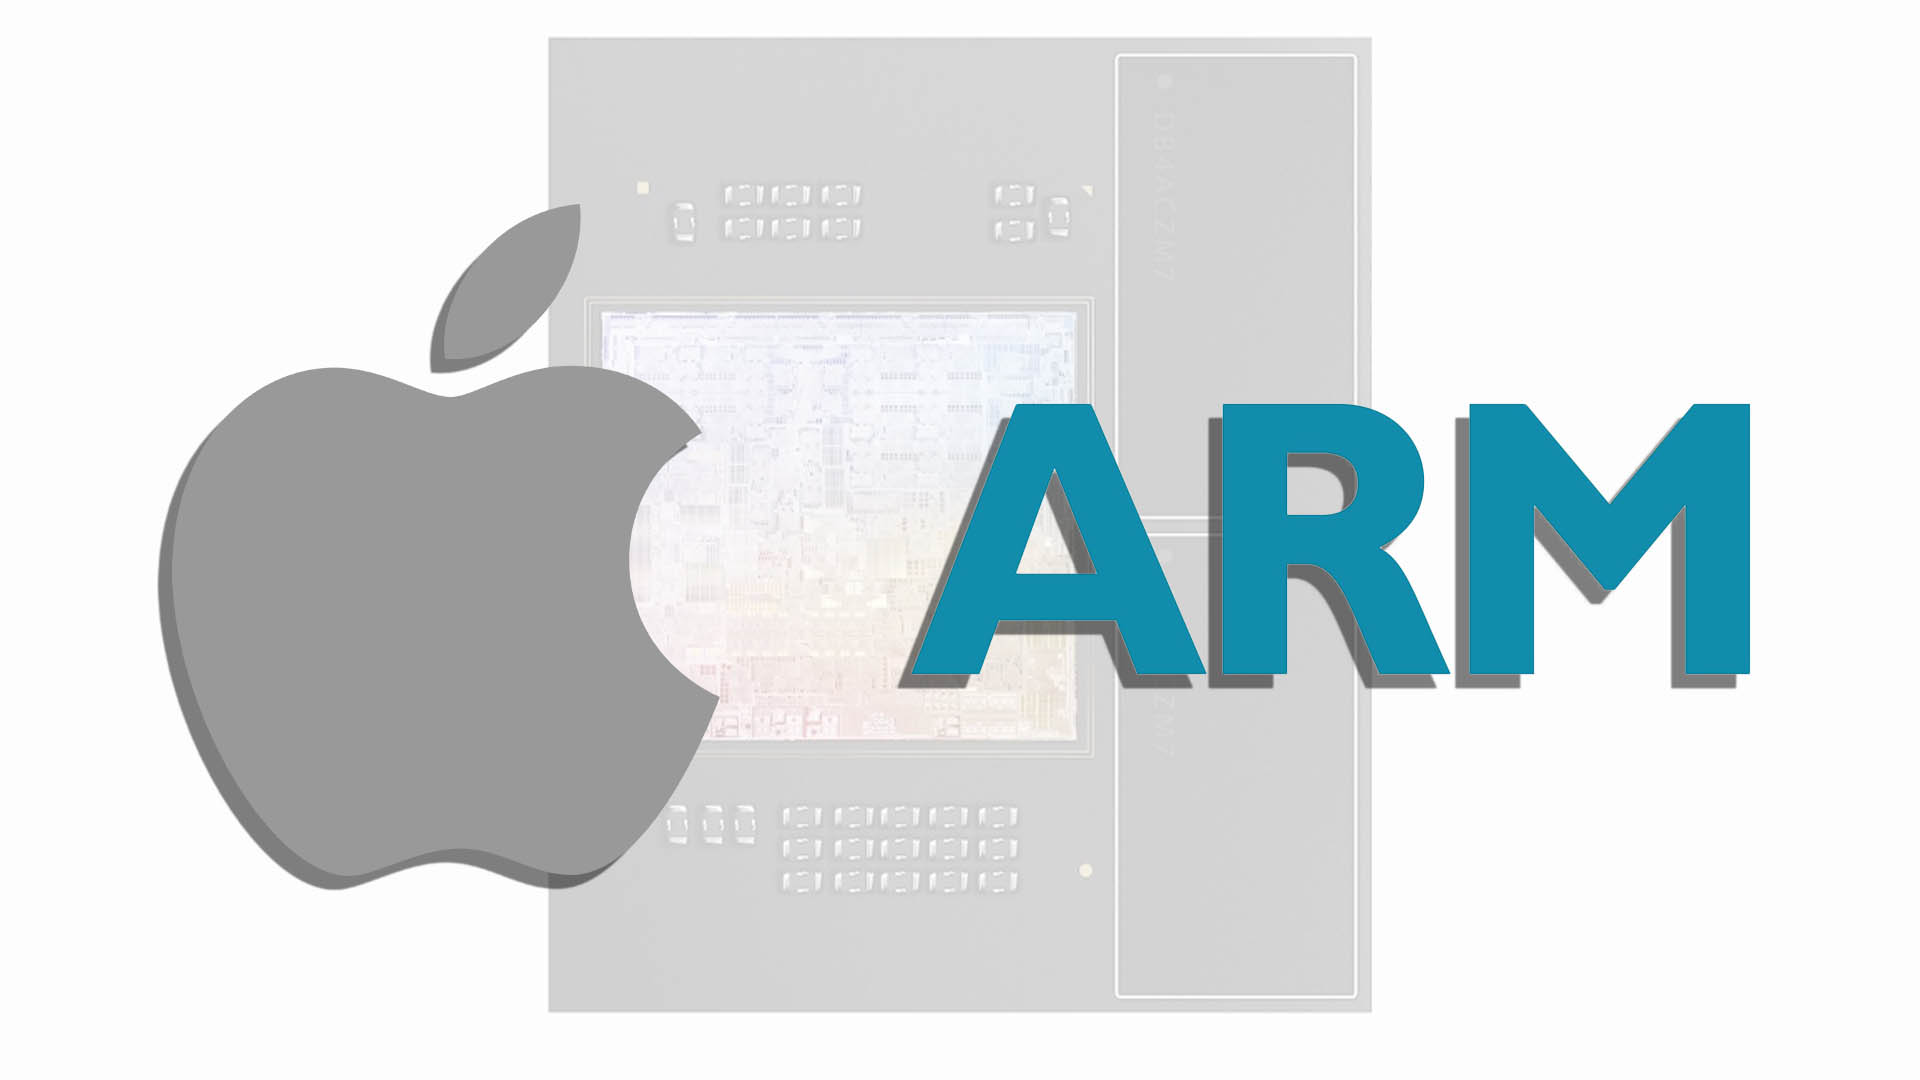 Apple Inks New Licensing Agreement With ARM For Future iPhone, Mac SoCs, Deal To Remain ‘Beyond 2040’